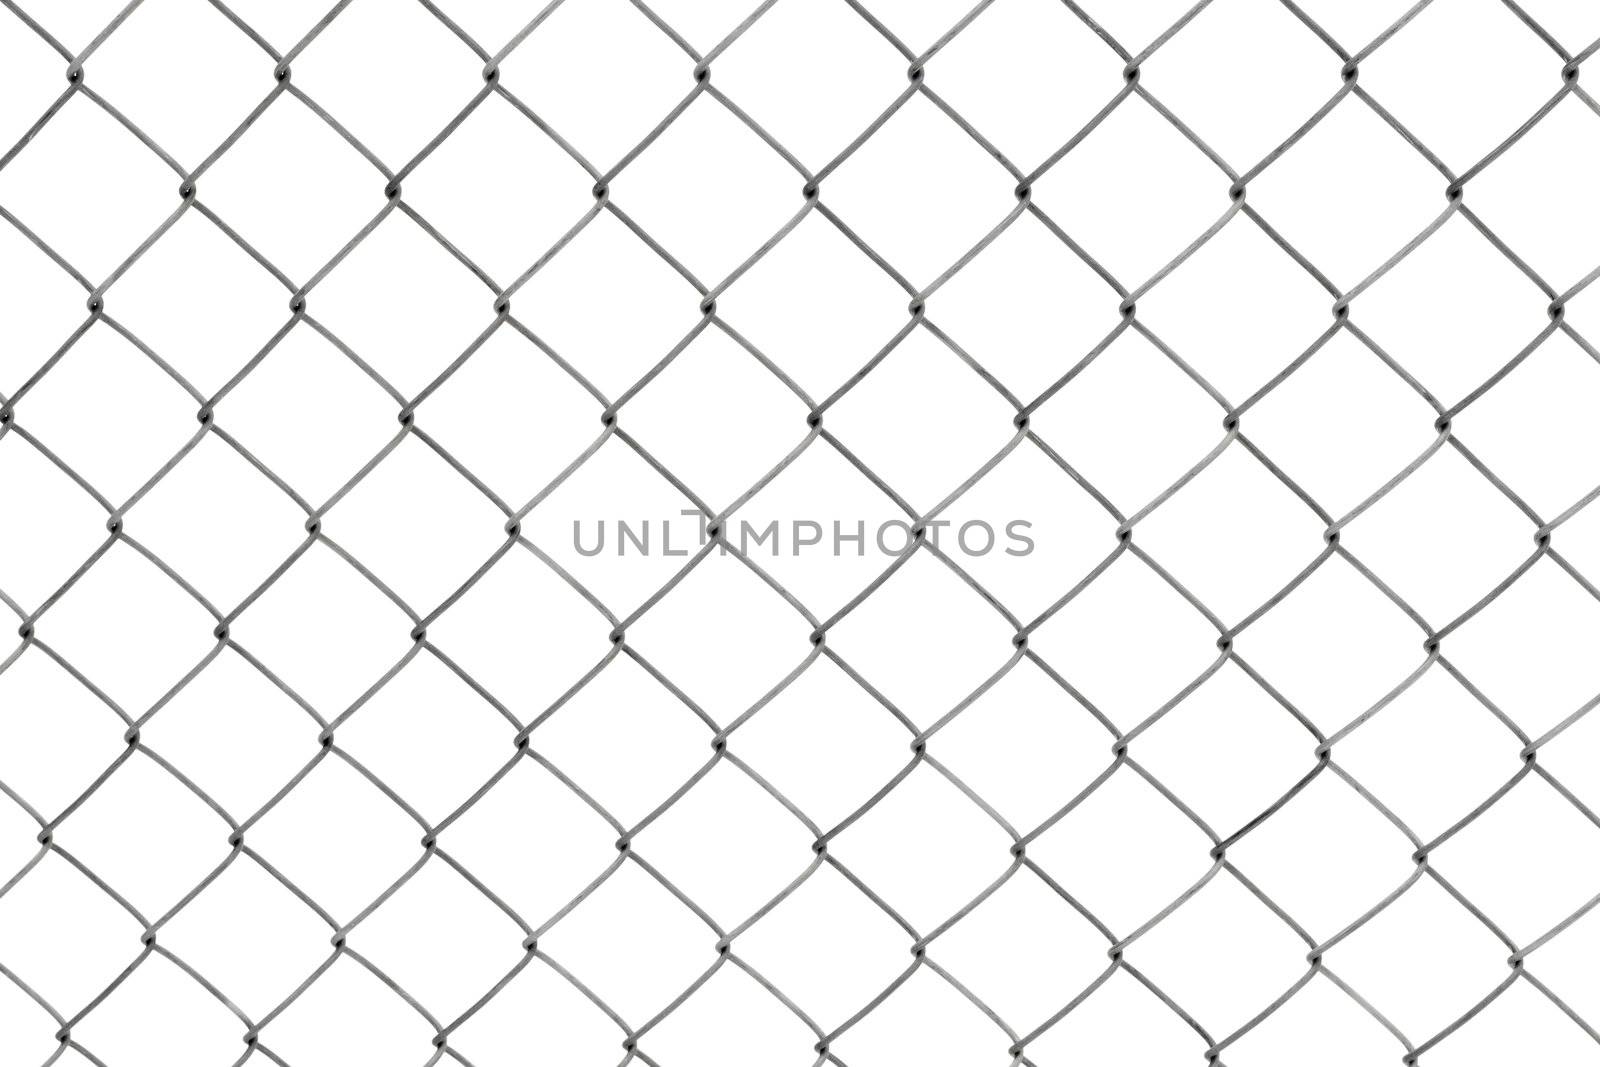 Chainlink fencing background texture pattern isolated on white background.